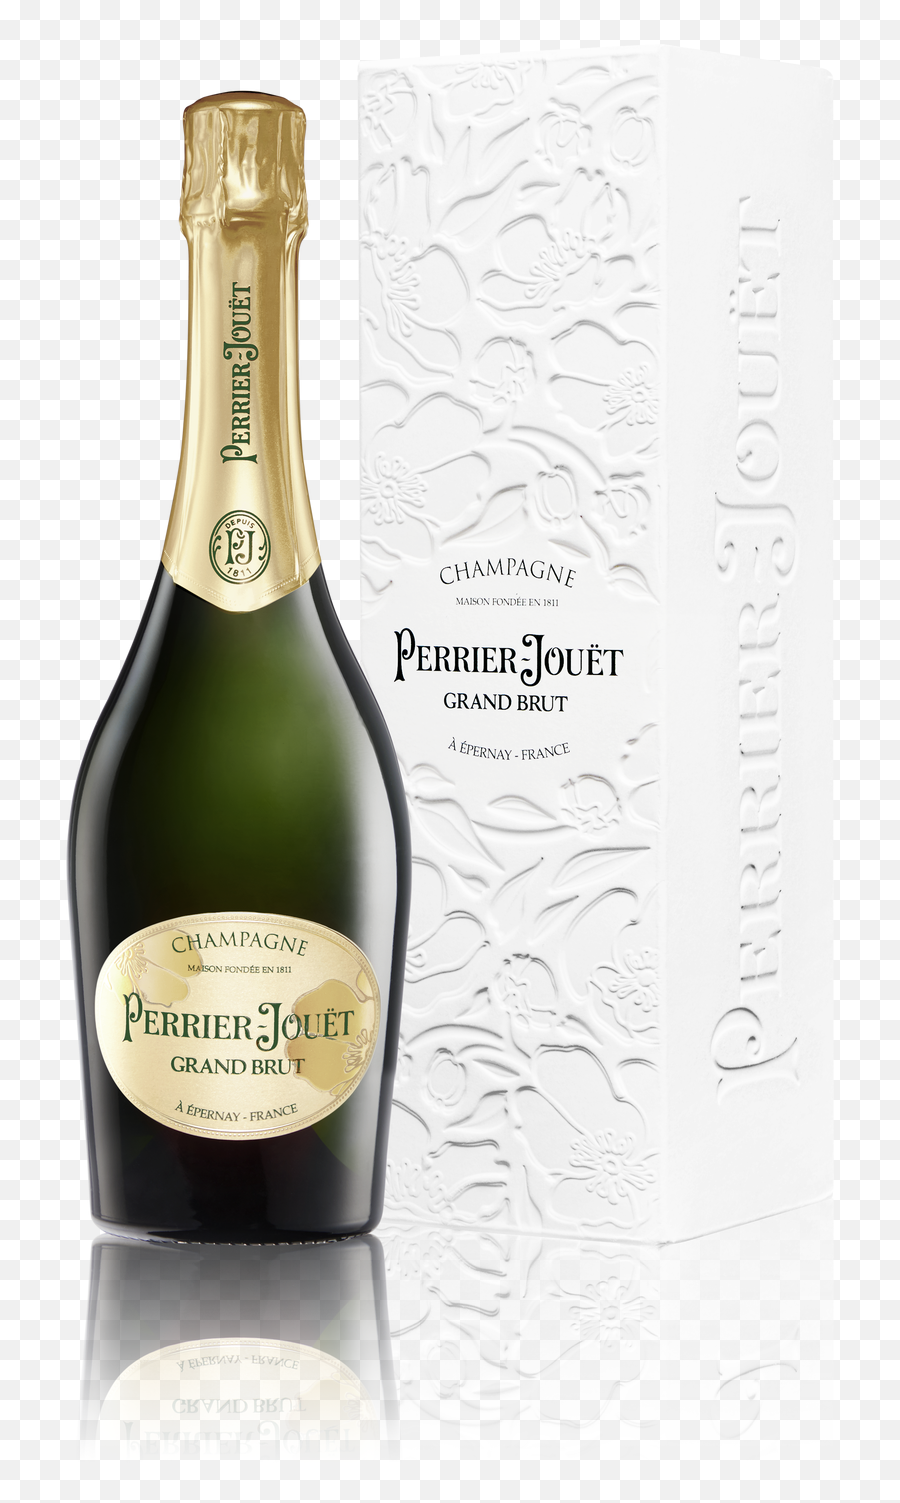 The Best Bubbles For Christmas And New - Champagne Perrier Jouet Grand Brut Emoji,Small Emoticon Of Popping Wine Bottle